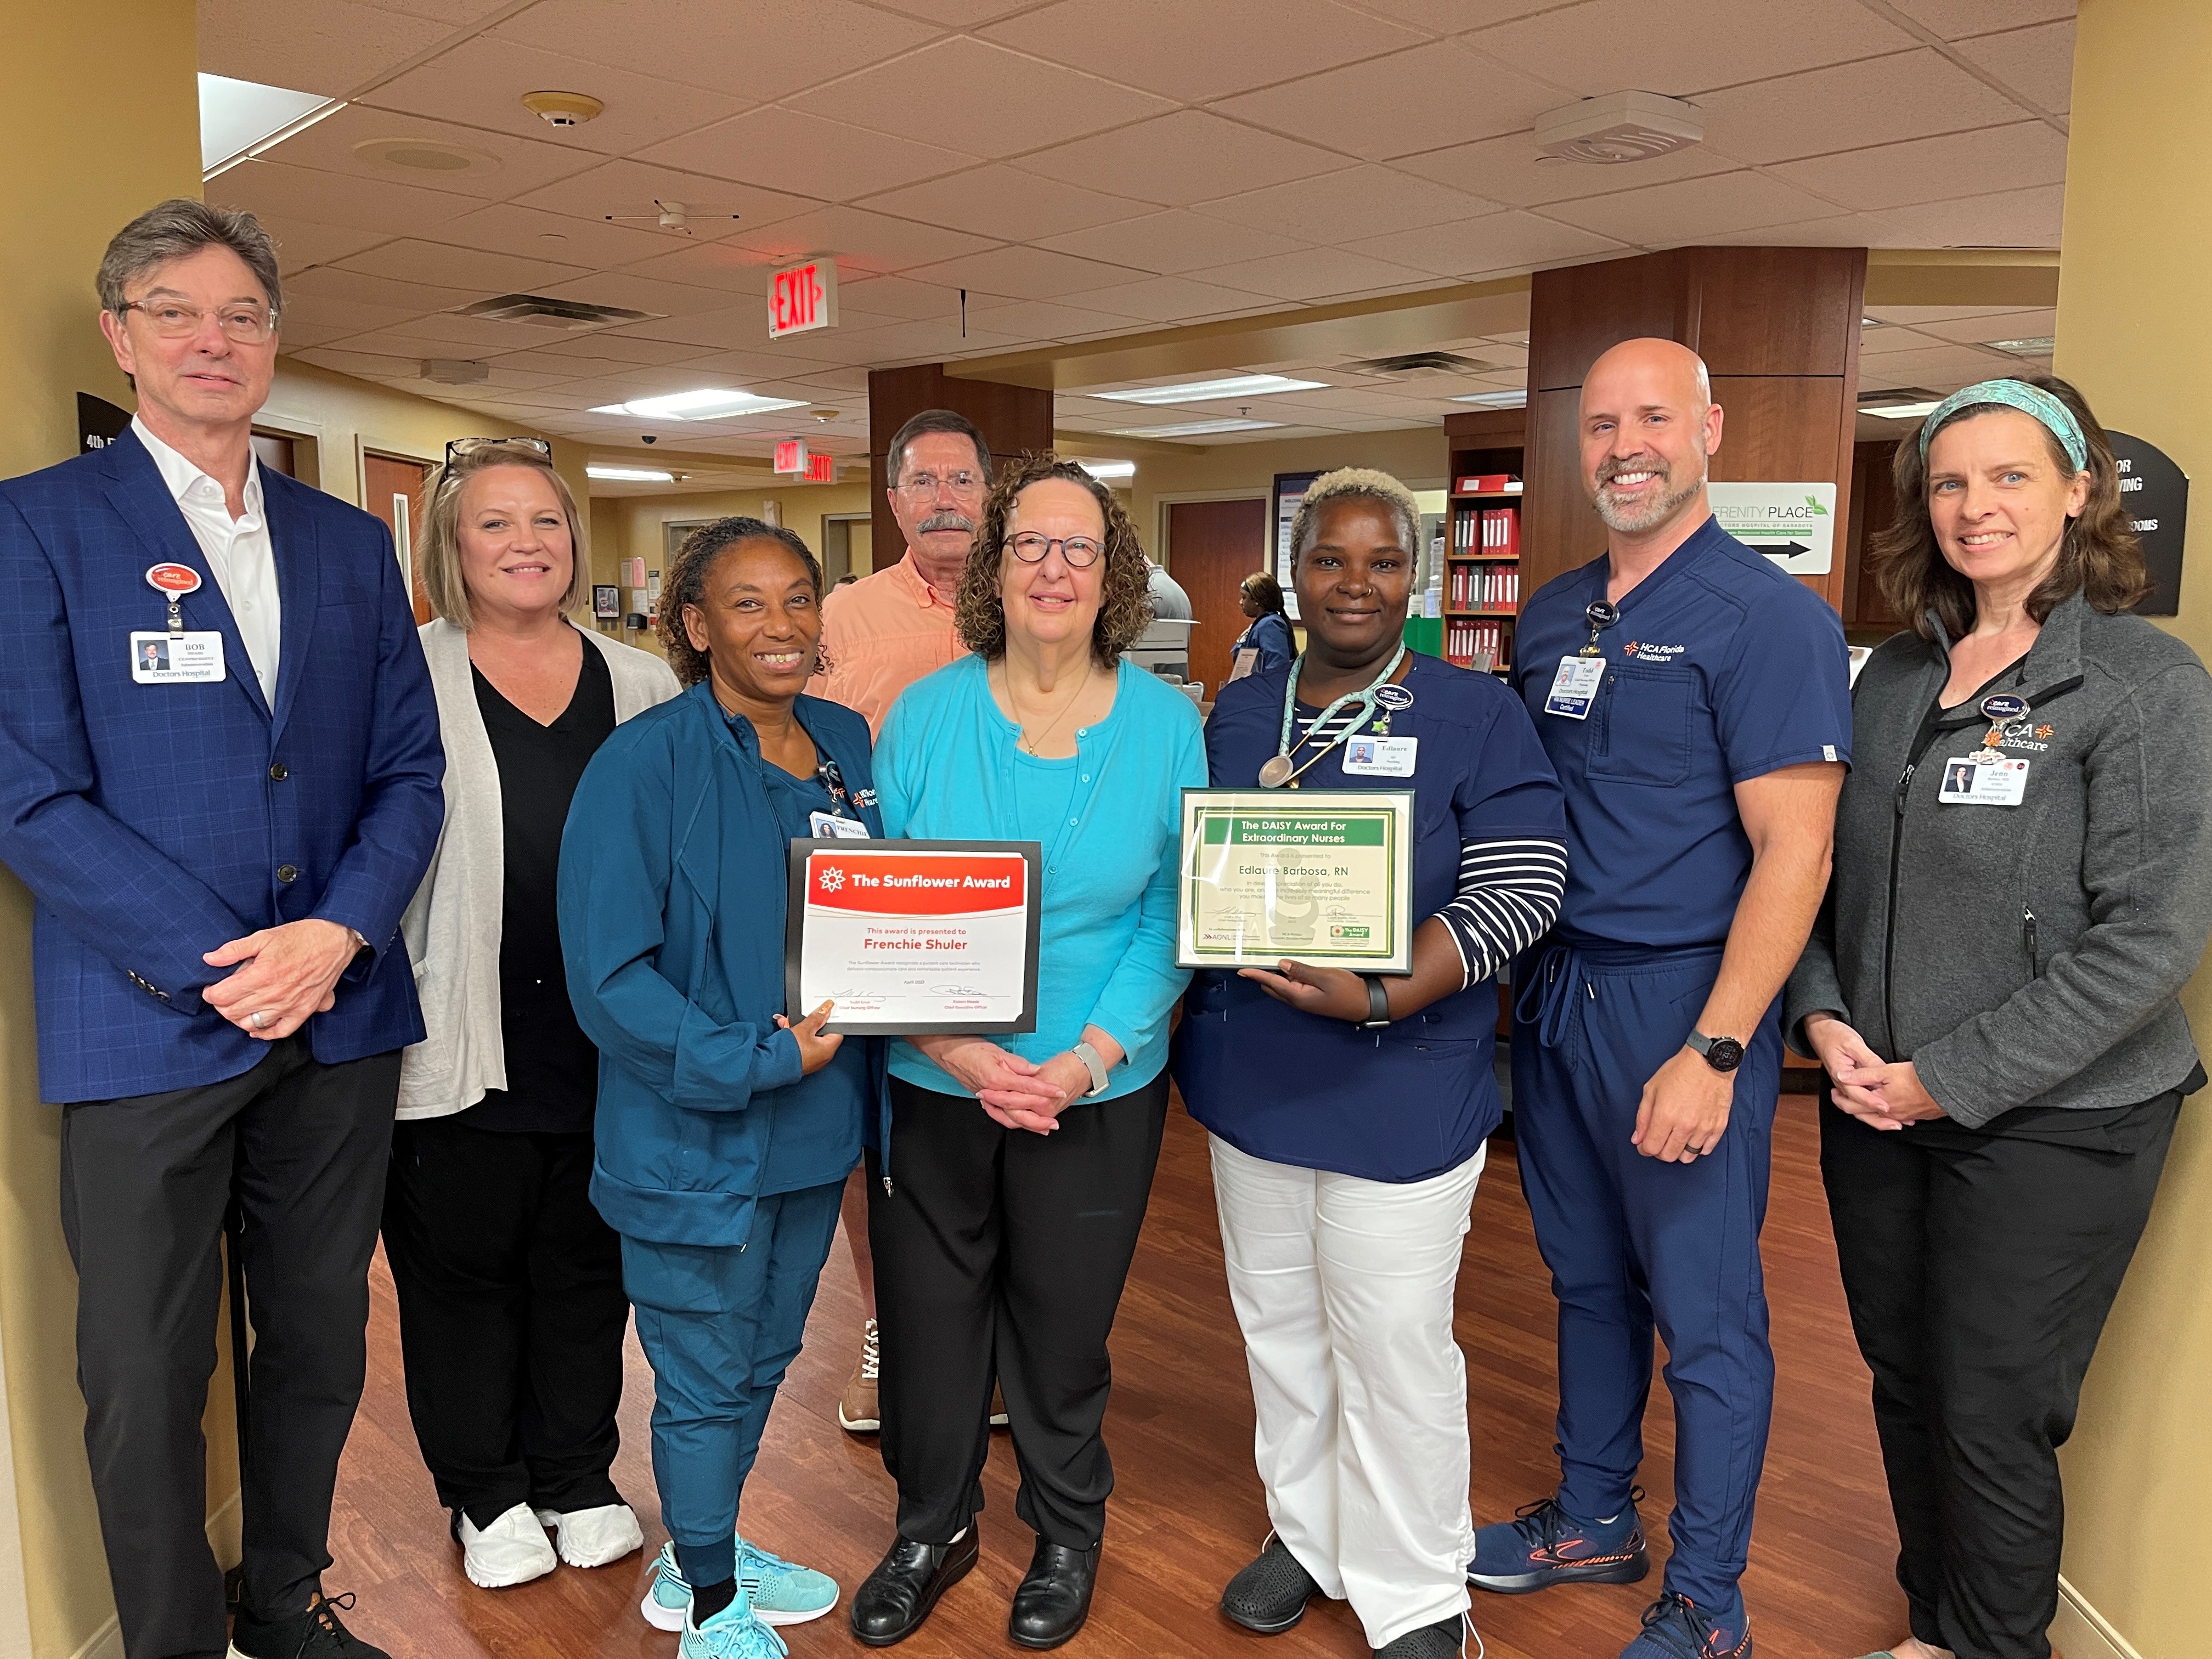 Nurse and PCT Honored with Daisy Award and Sunflower Award by Patient